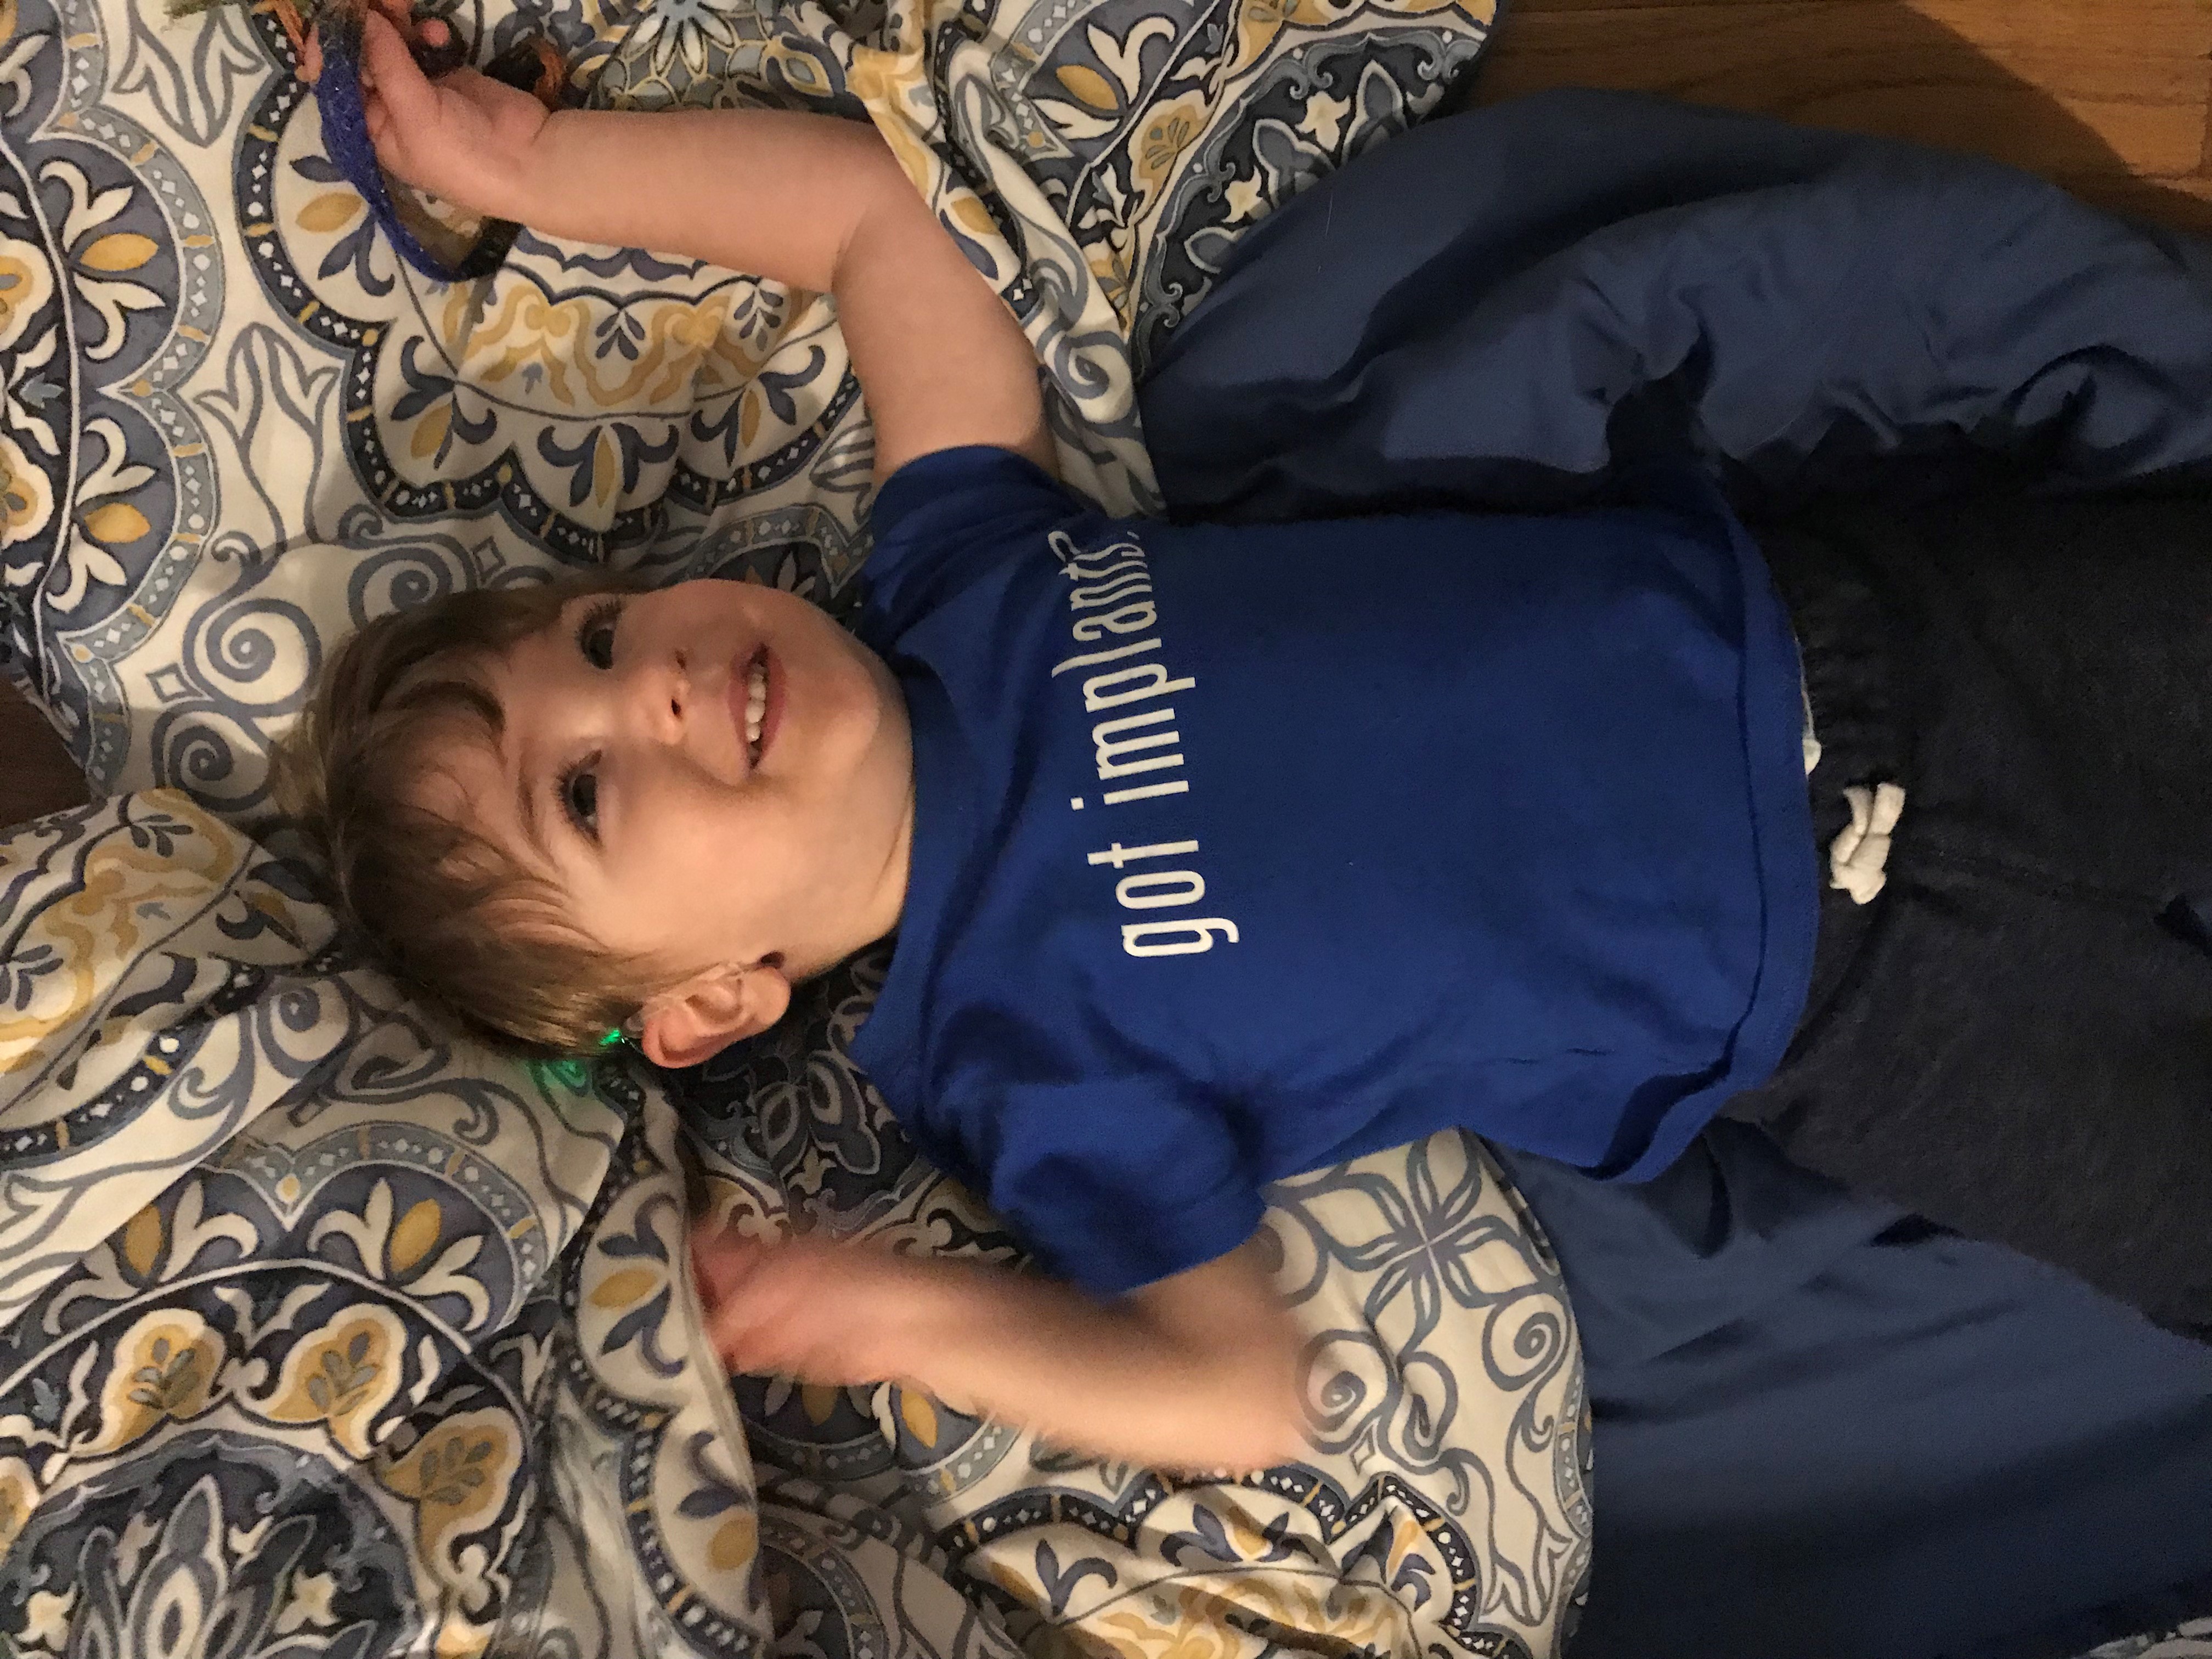 Levi, who is a child with hearing loss, with his got implants shirt